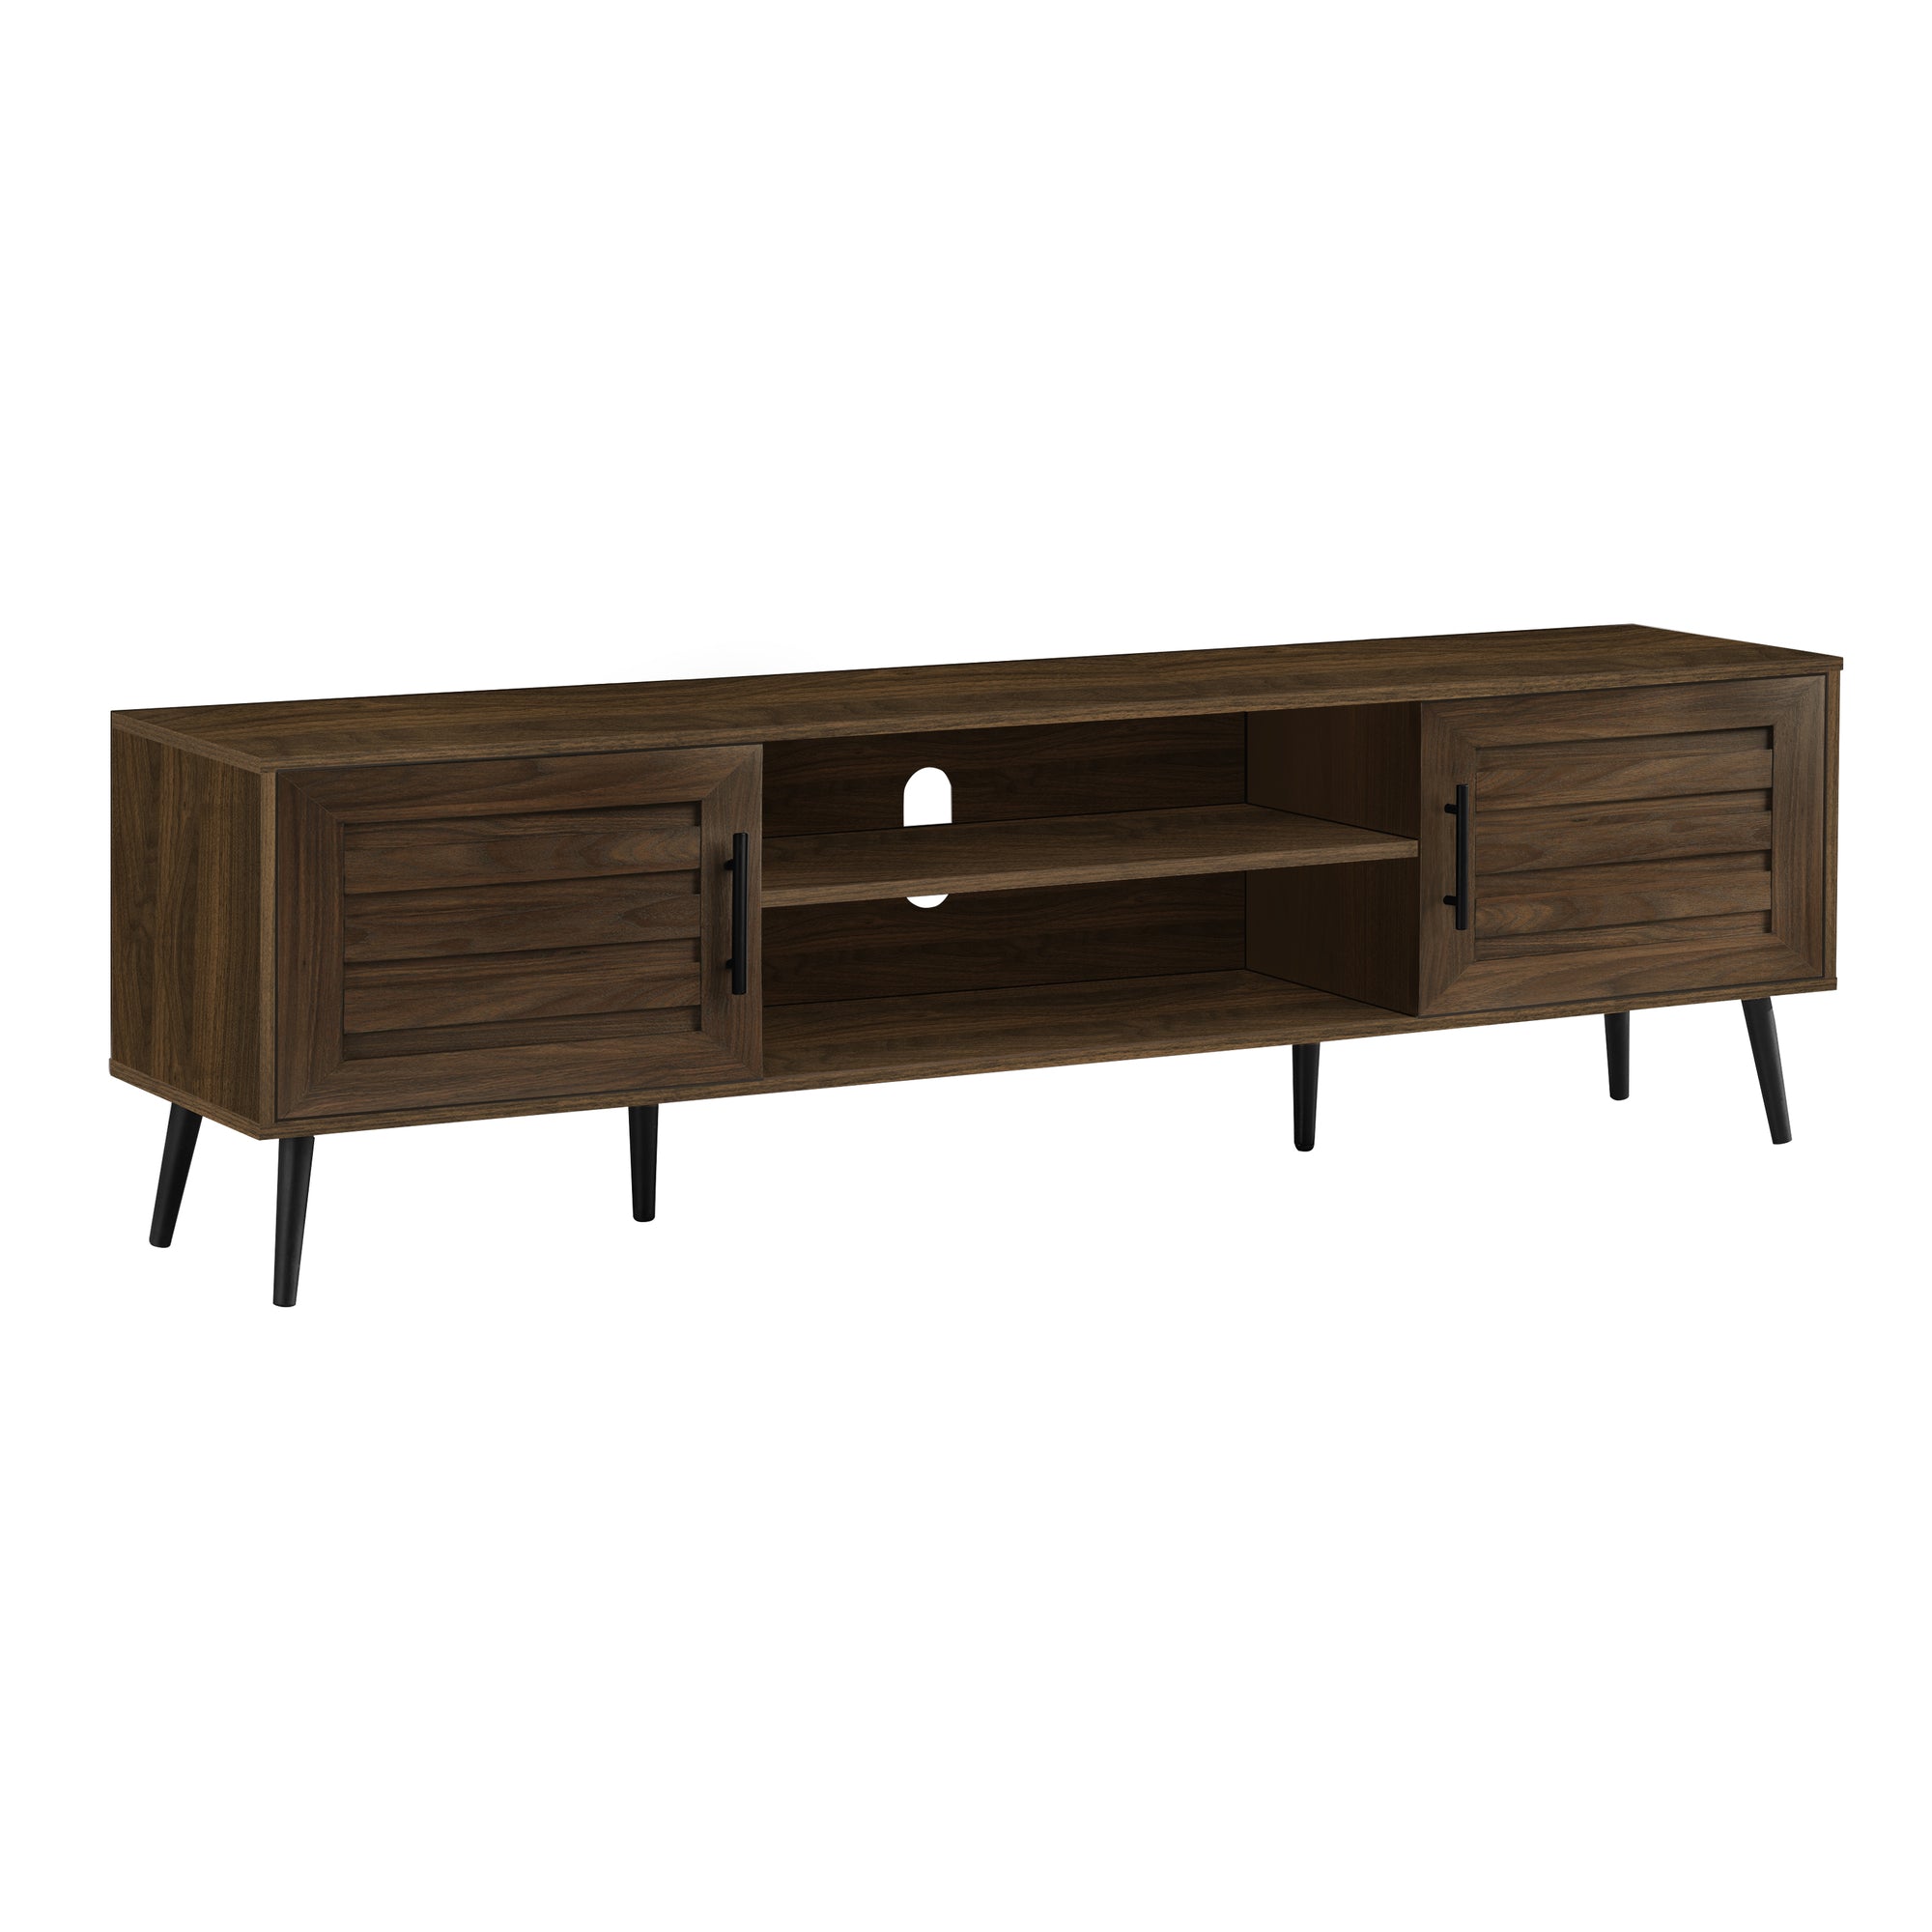 TV STAND - 72"L / BROWN WOOD-LOOK WITH 2 DOORS